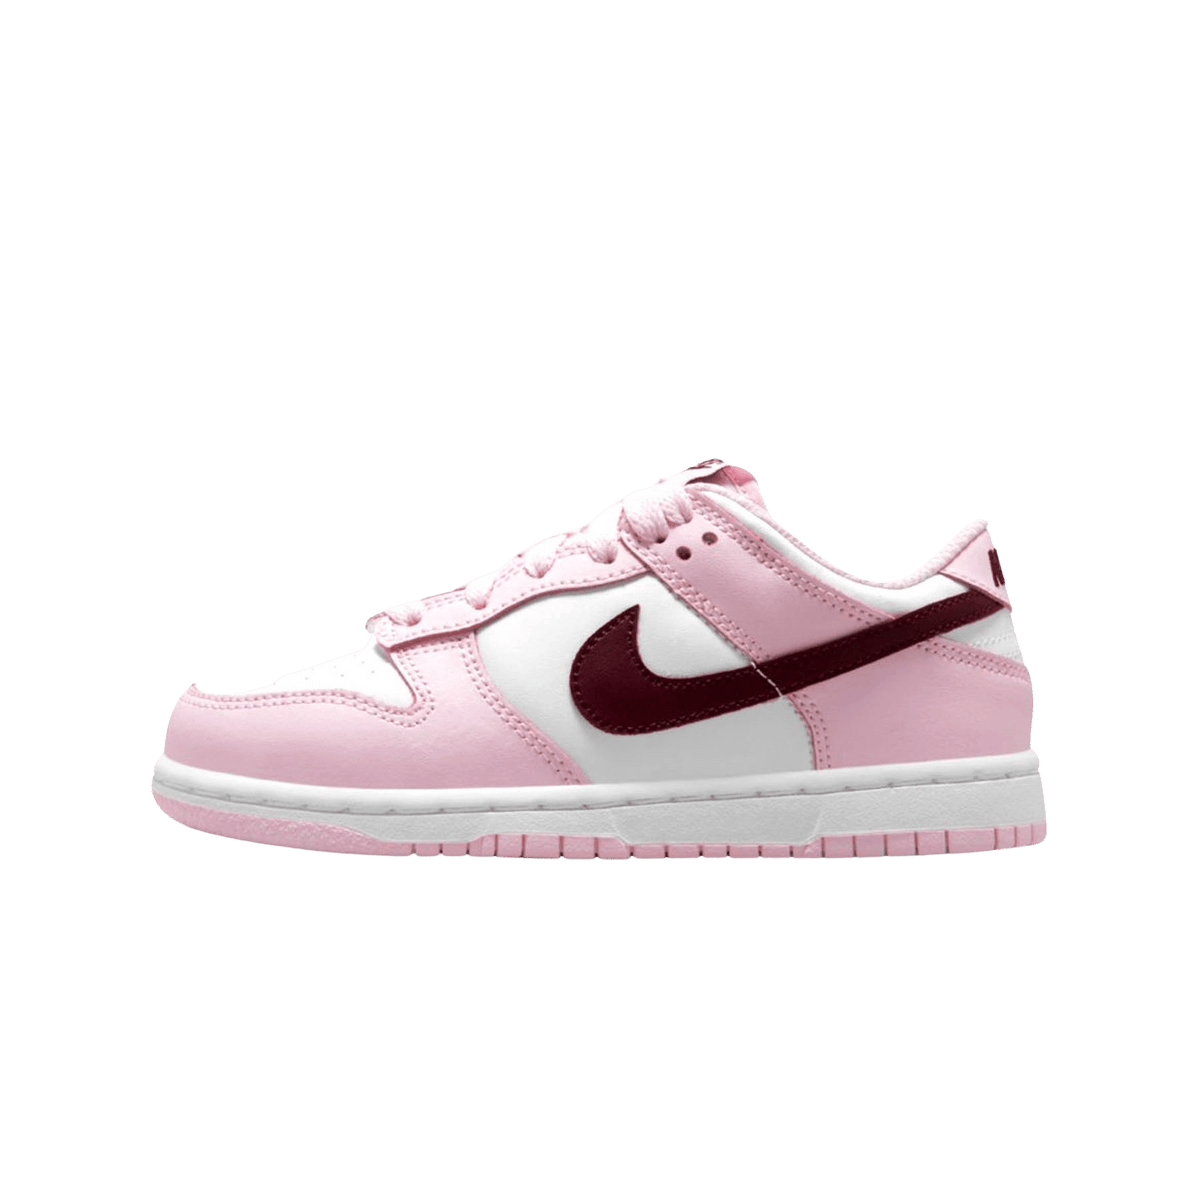 nike Del dunk low pink red white ps CW1588 601 1